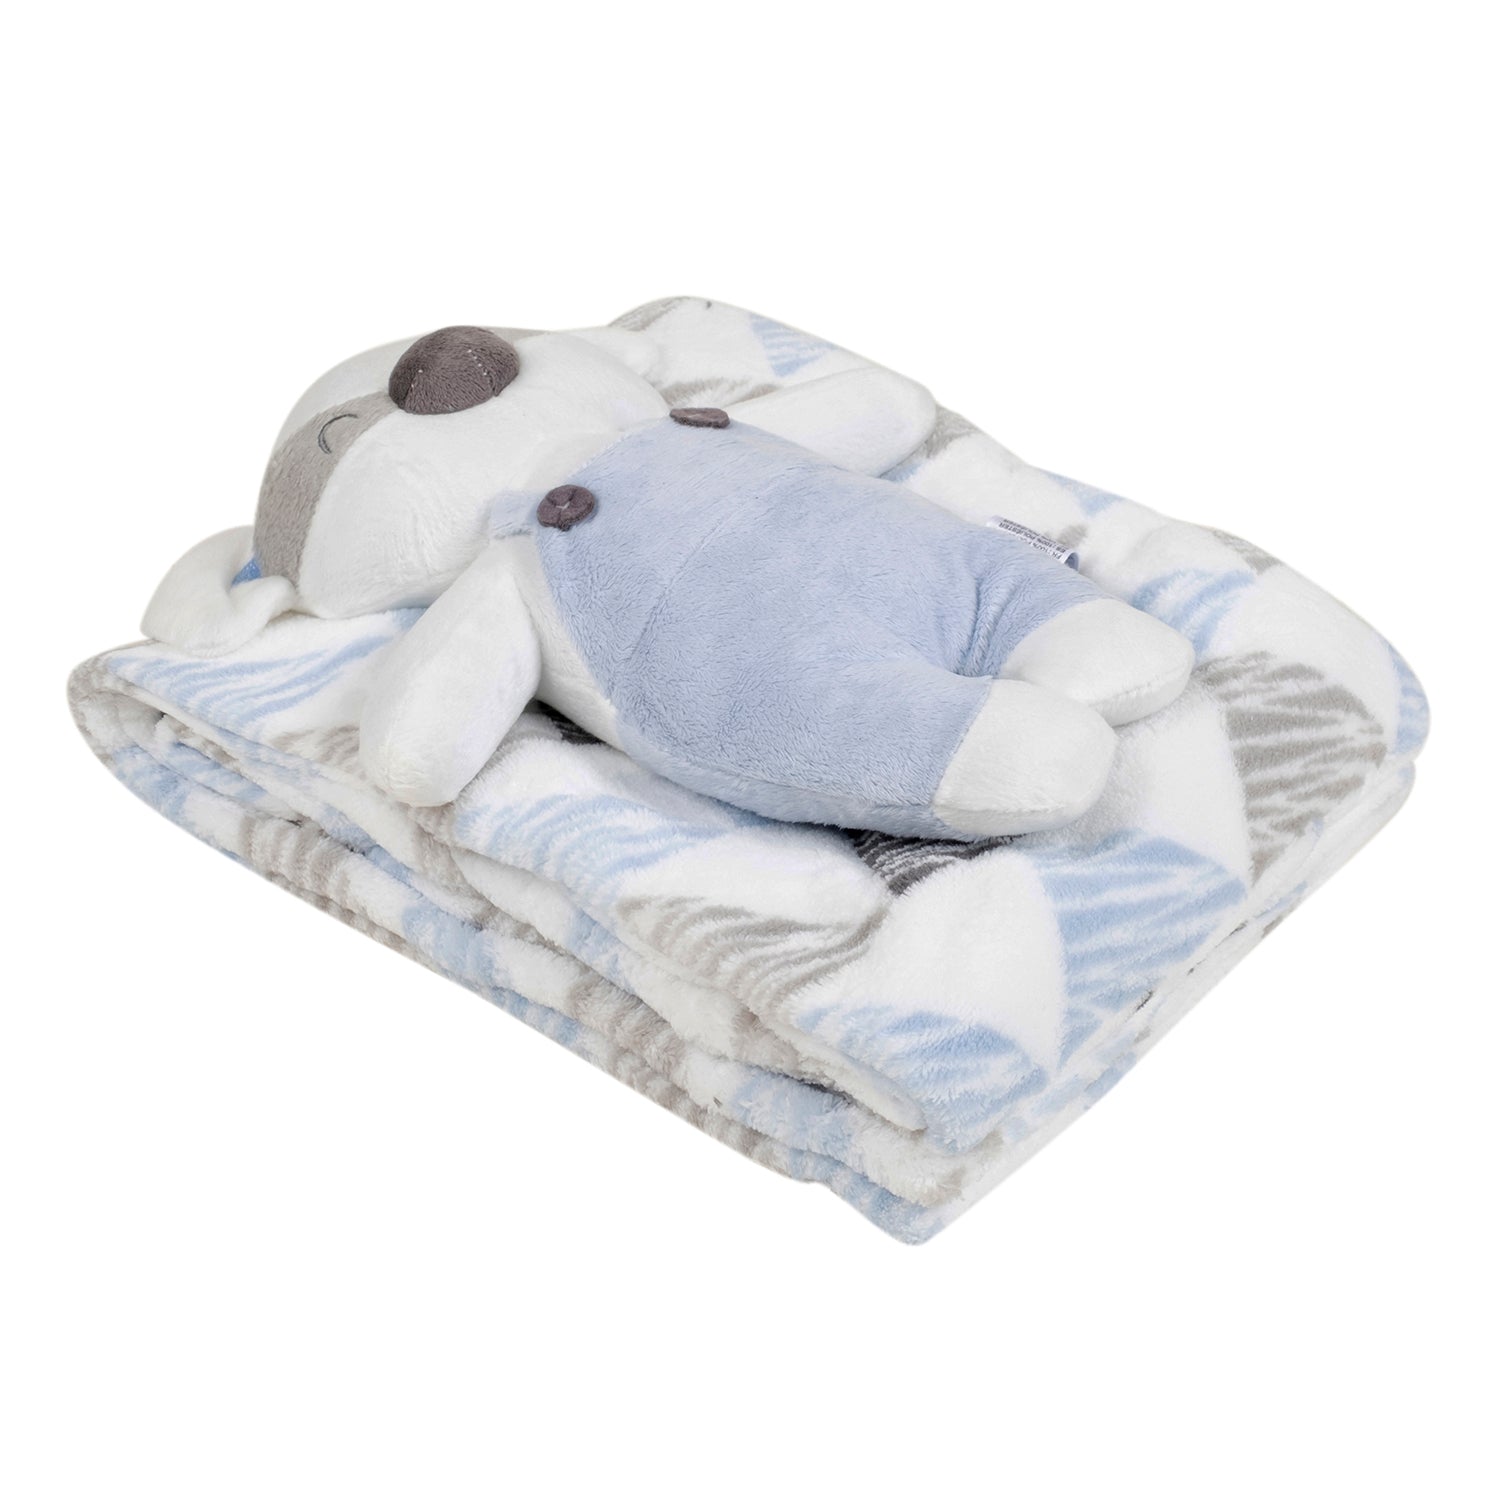 Baby Moo Bear Snuggle Buddy Soft Rattle and Plush Blanket Gift Toy Blanket - Blue